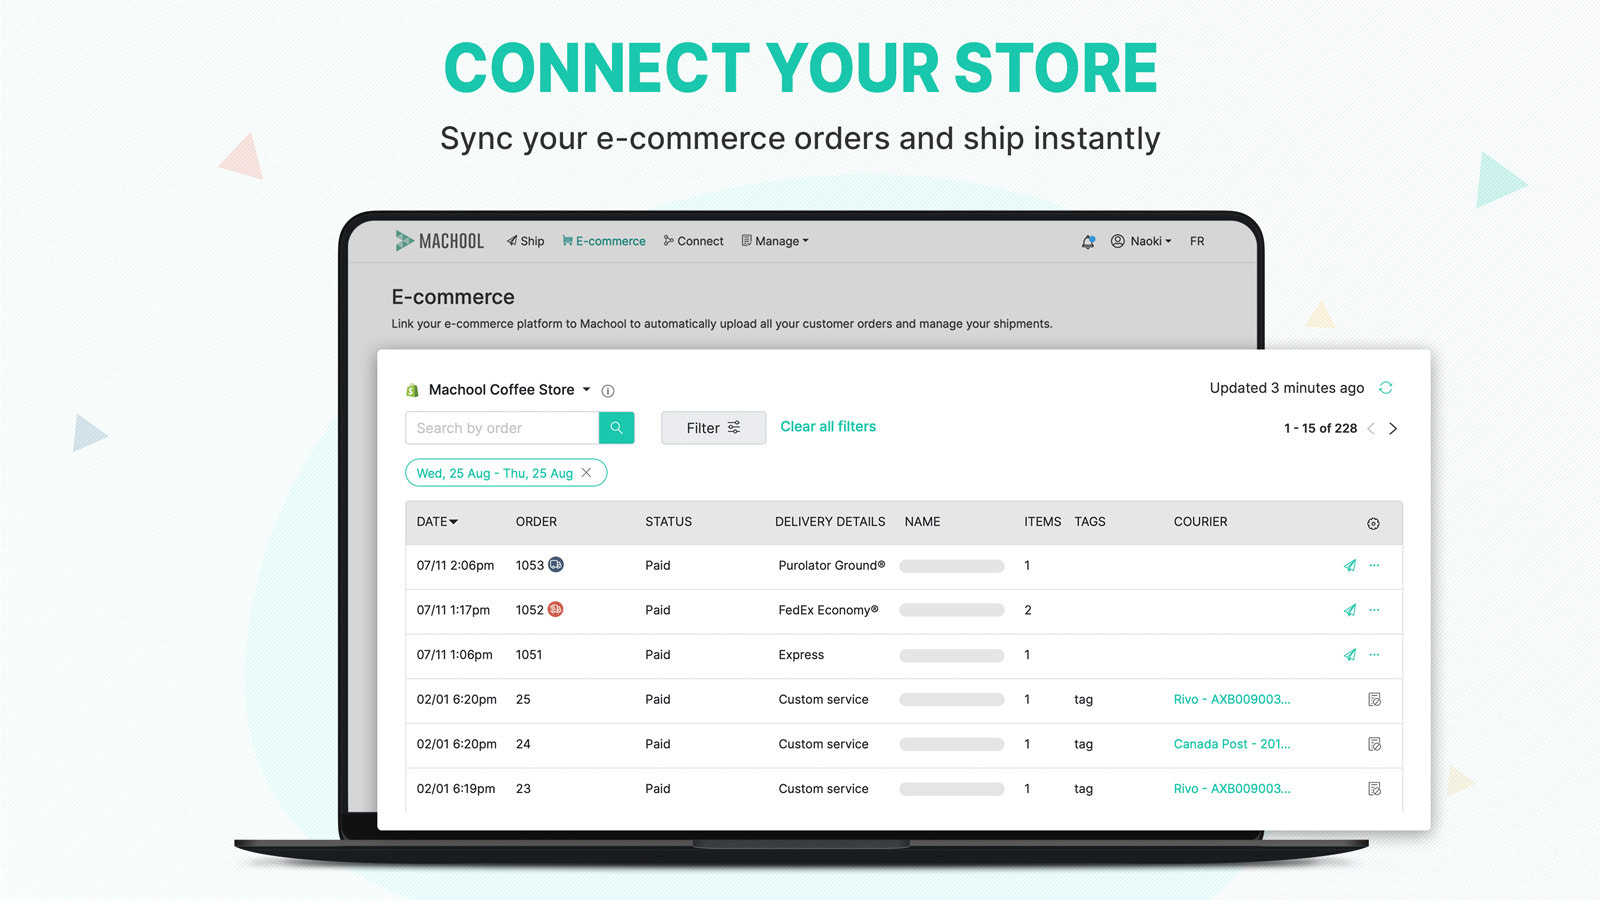 E-commerce order page